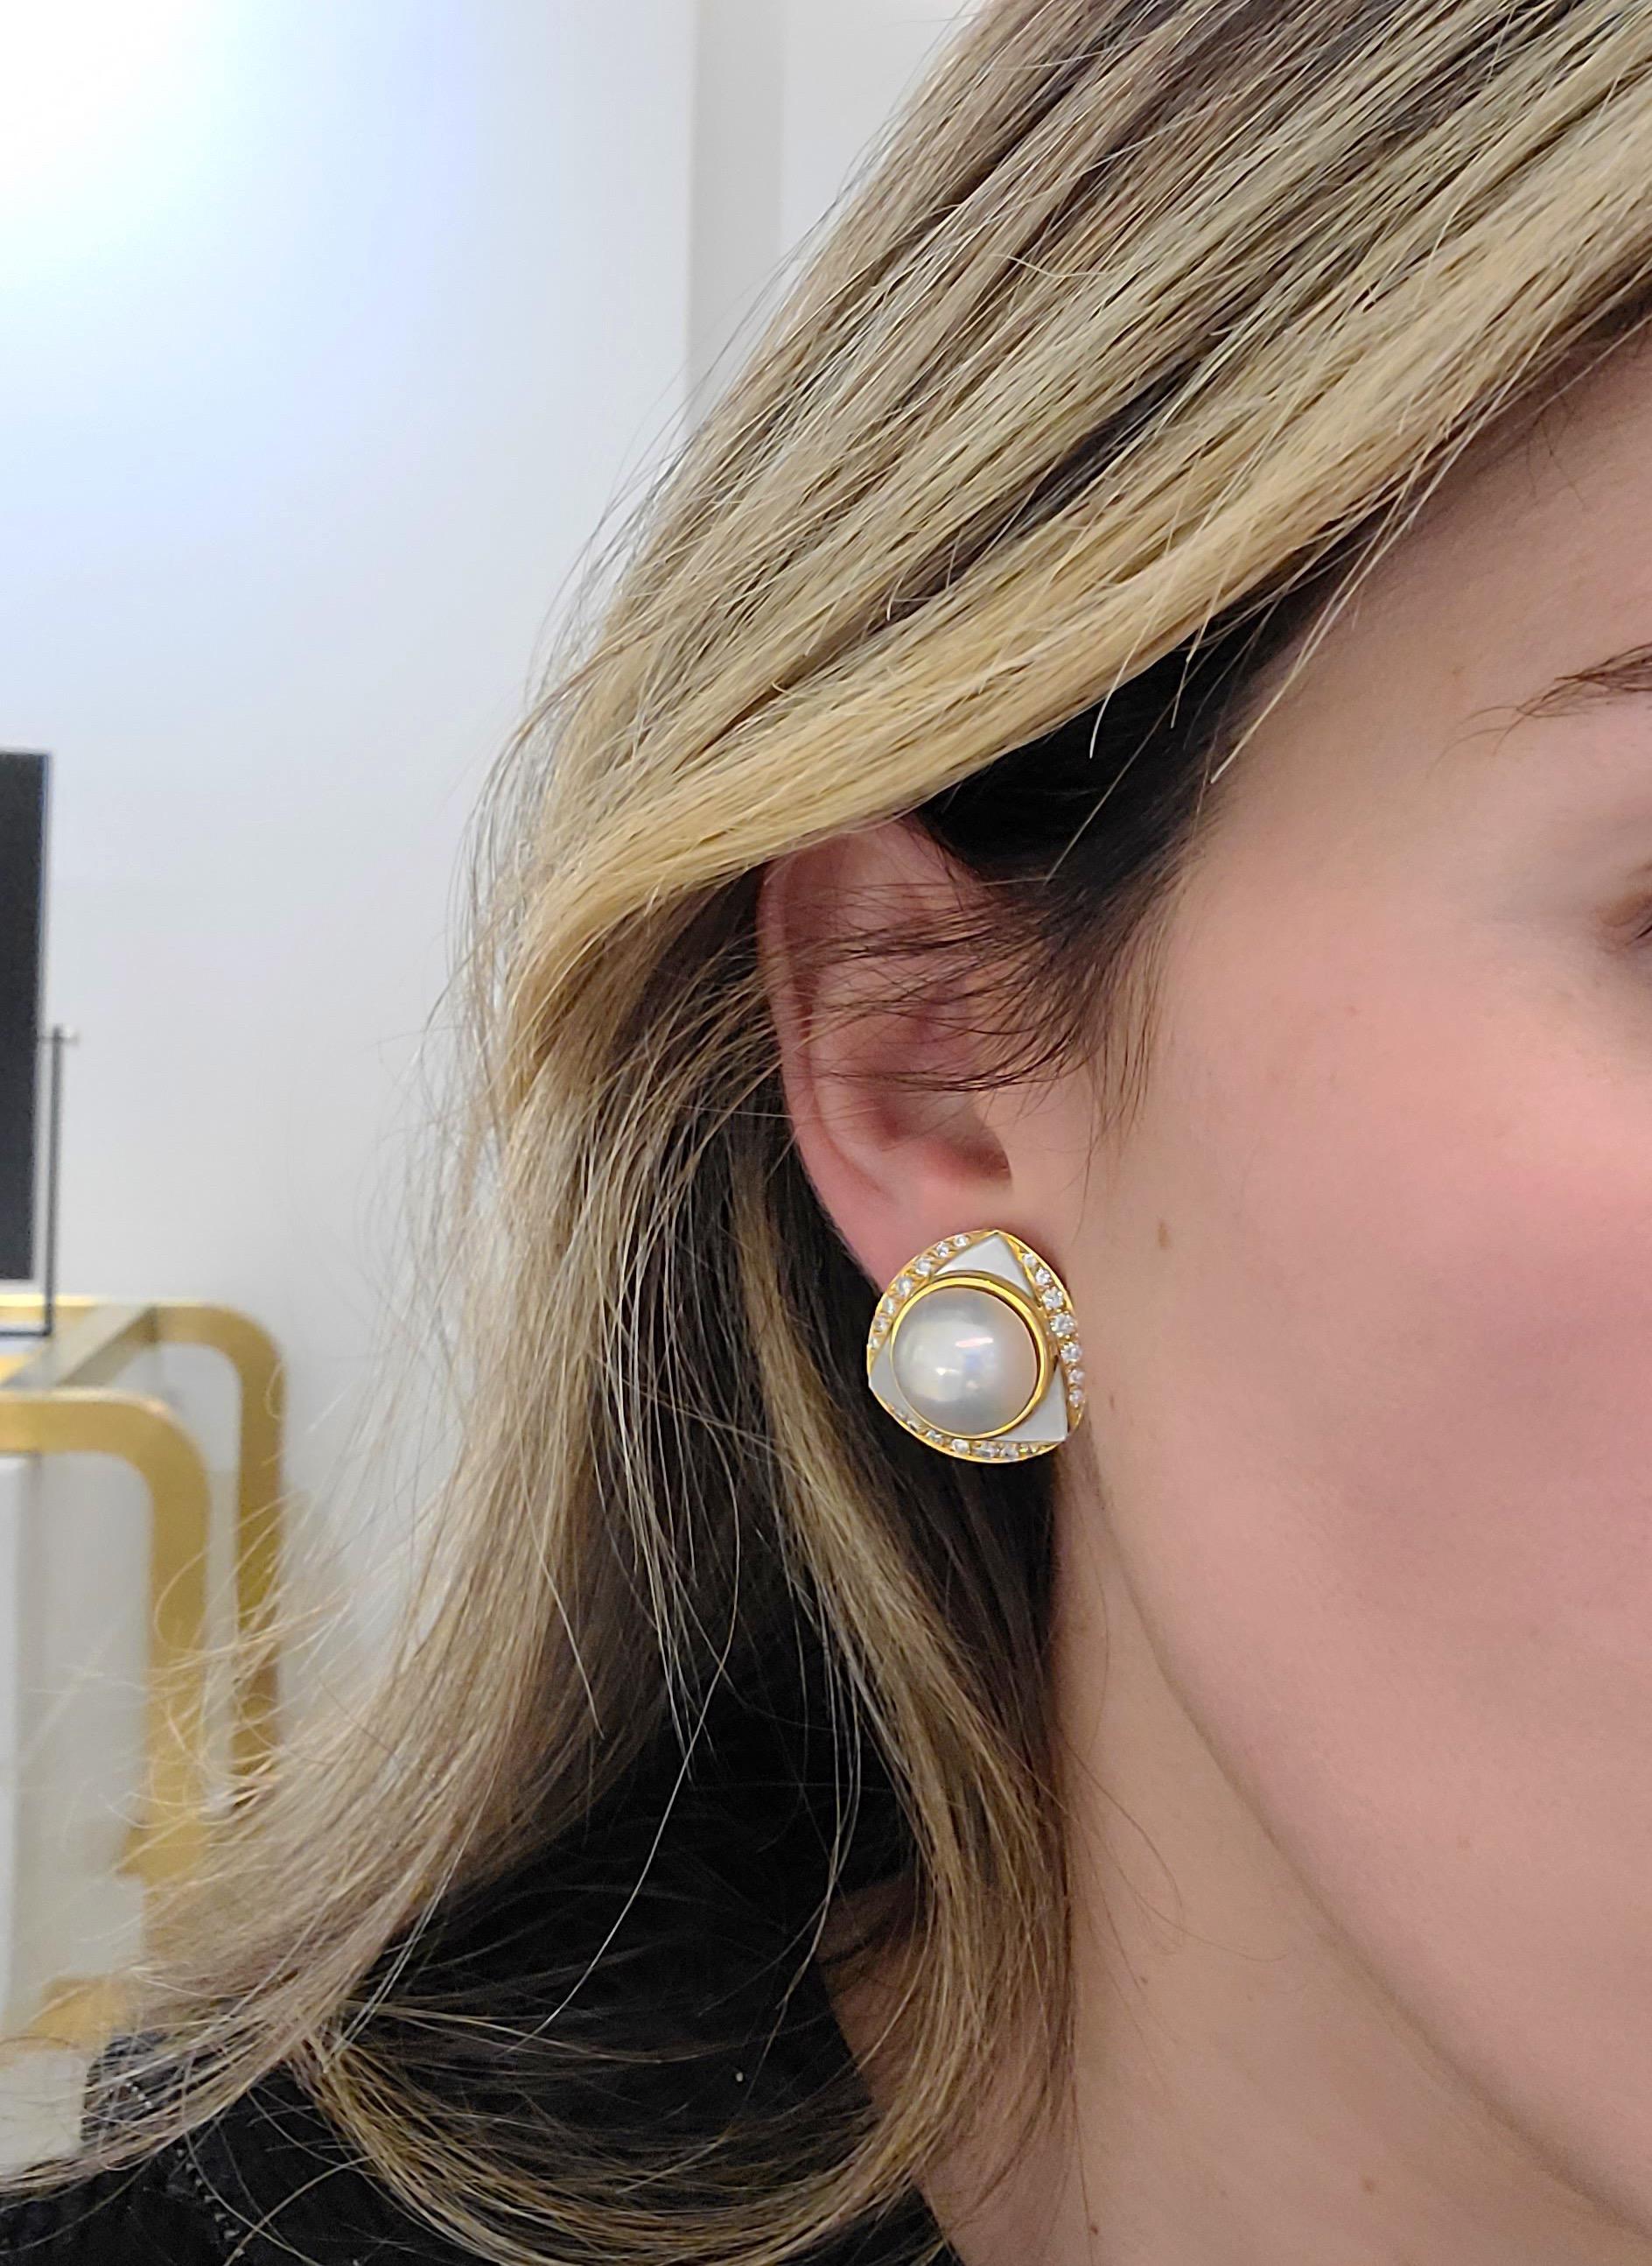 Cellini Jewelers NYC, 18KT Yellow Gold Earrings feature two Mabe Pearl Centers surrounded with Mother of pearl in a triangle shape, which is further surrounded with 1.06Ct of round brilliant diamonds. The Gorgeous combination of pearls and Geometric